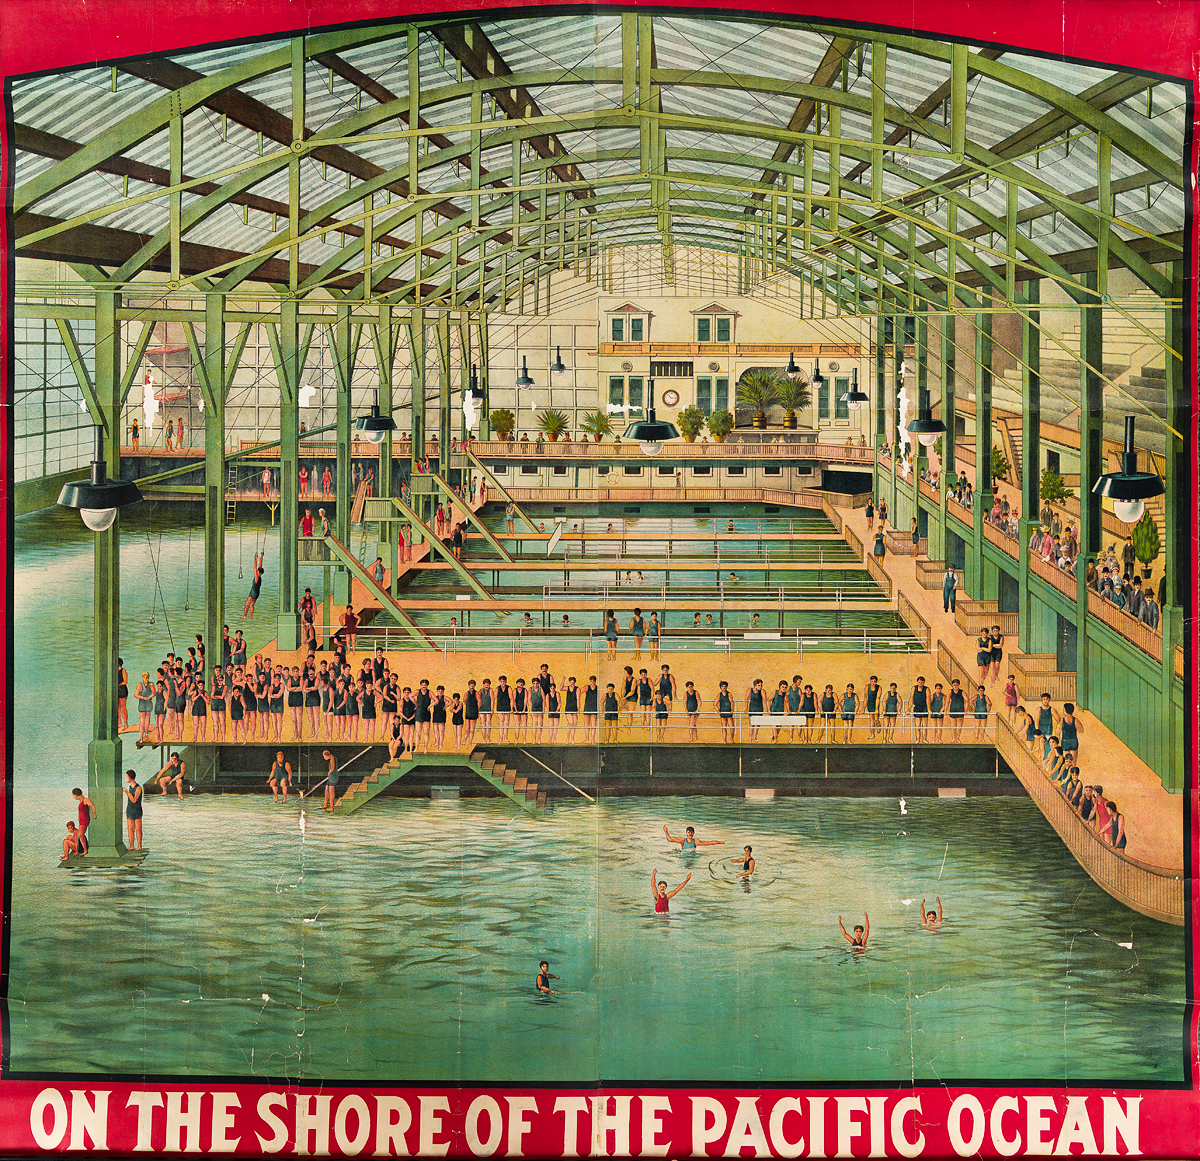 DESIGNER UNKNOWN. [SUTRO BATHS] / ON THE SHORE OF THE PACIFIC OCEAN. 1896. 78x80 inches, 198x203 cm.